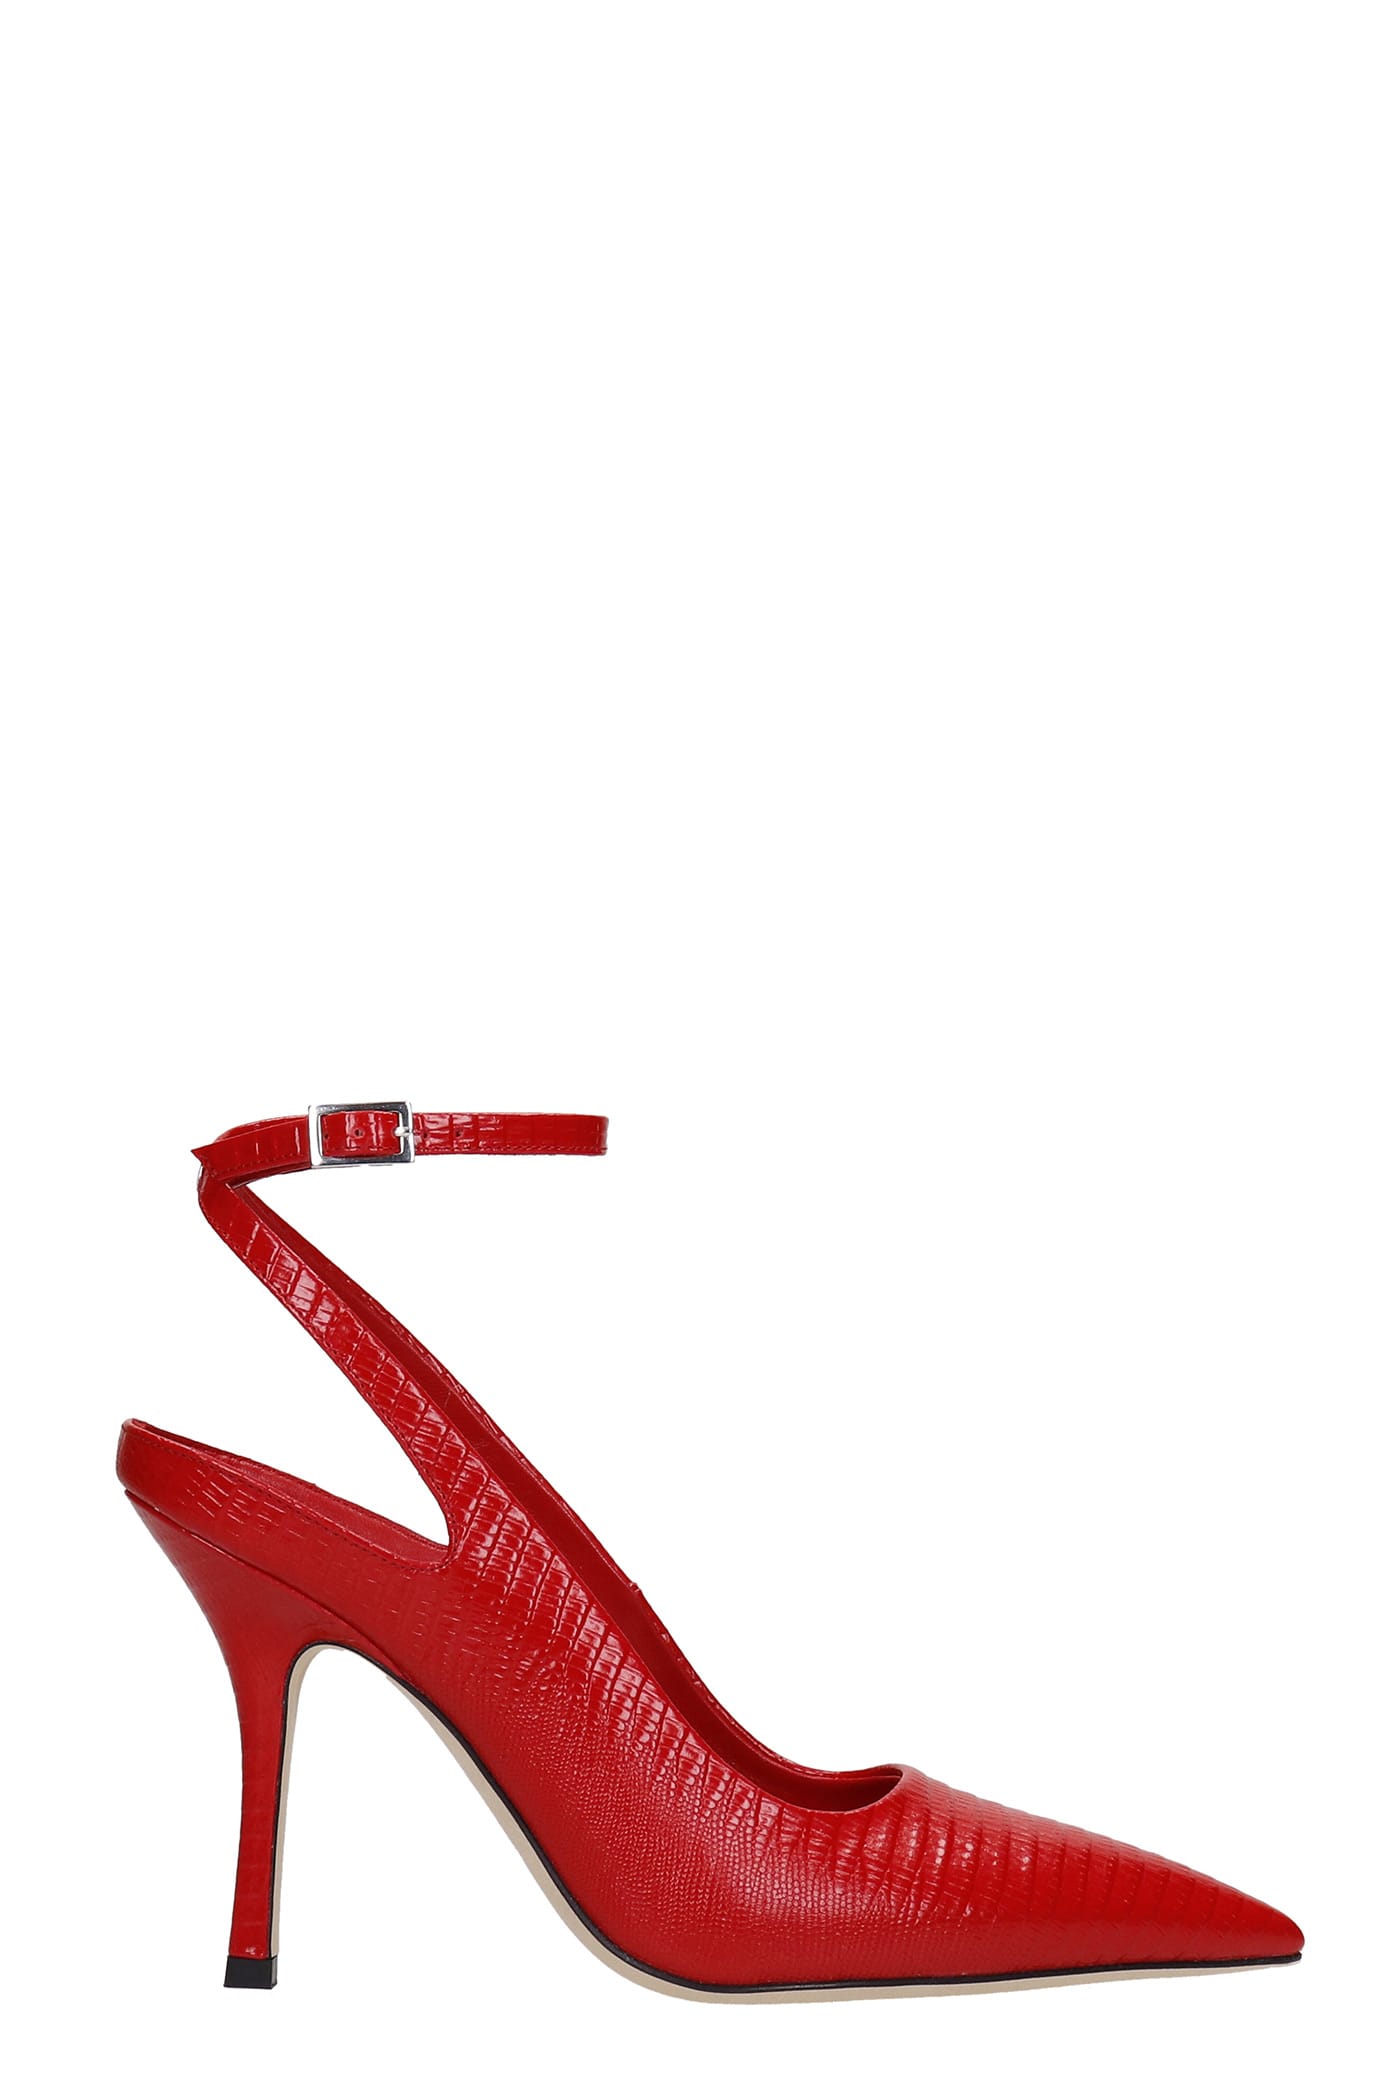 Paris Texas Mama Pumps In Red Leather